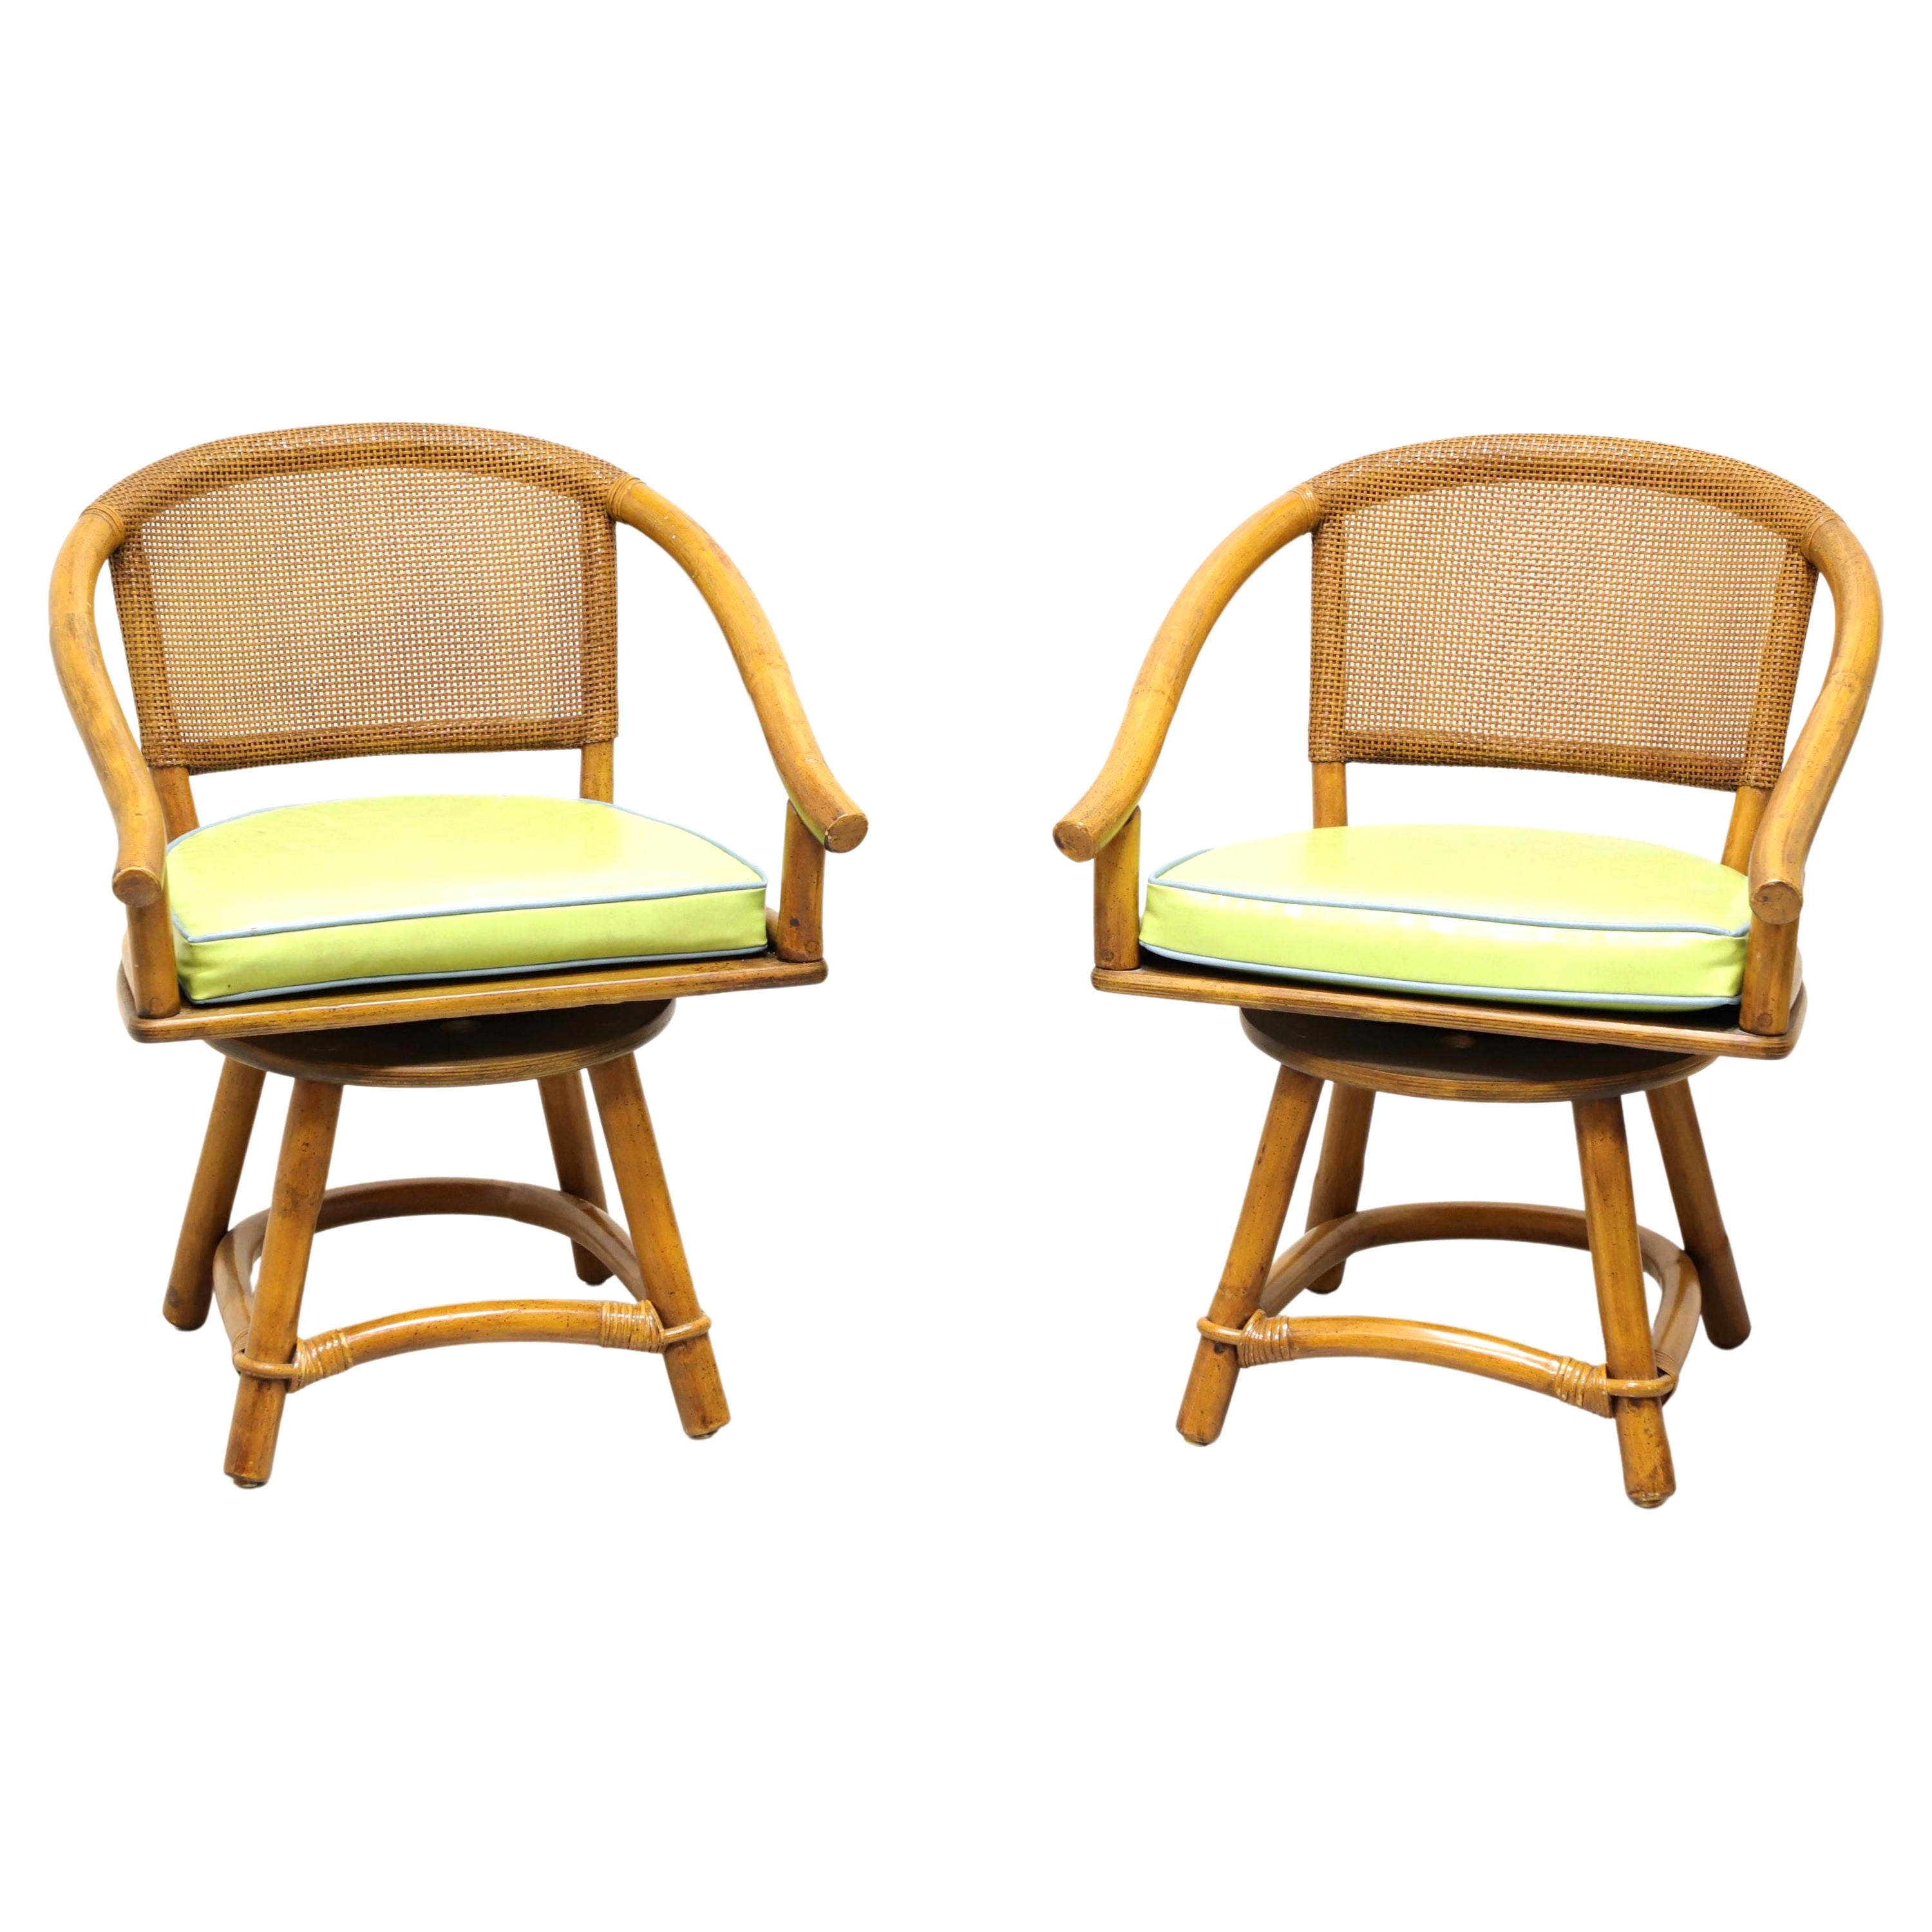 FICKS REED Mid 20th Century Faux Bamboo Rattan Swivel Chairs - Pair A For Sale